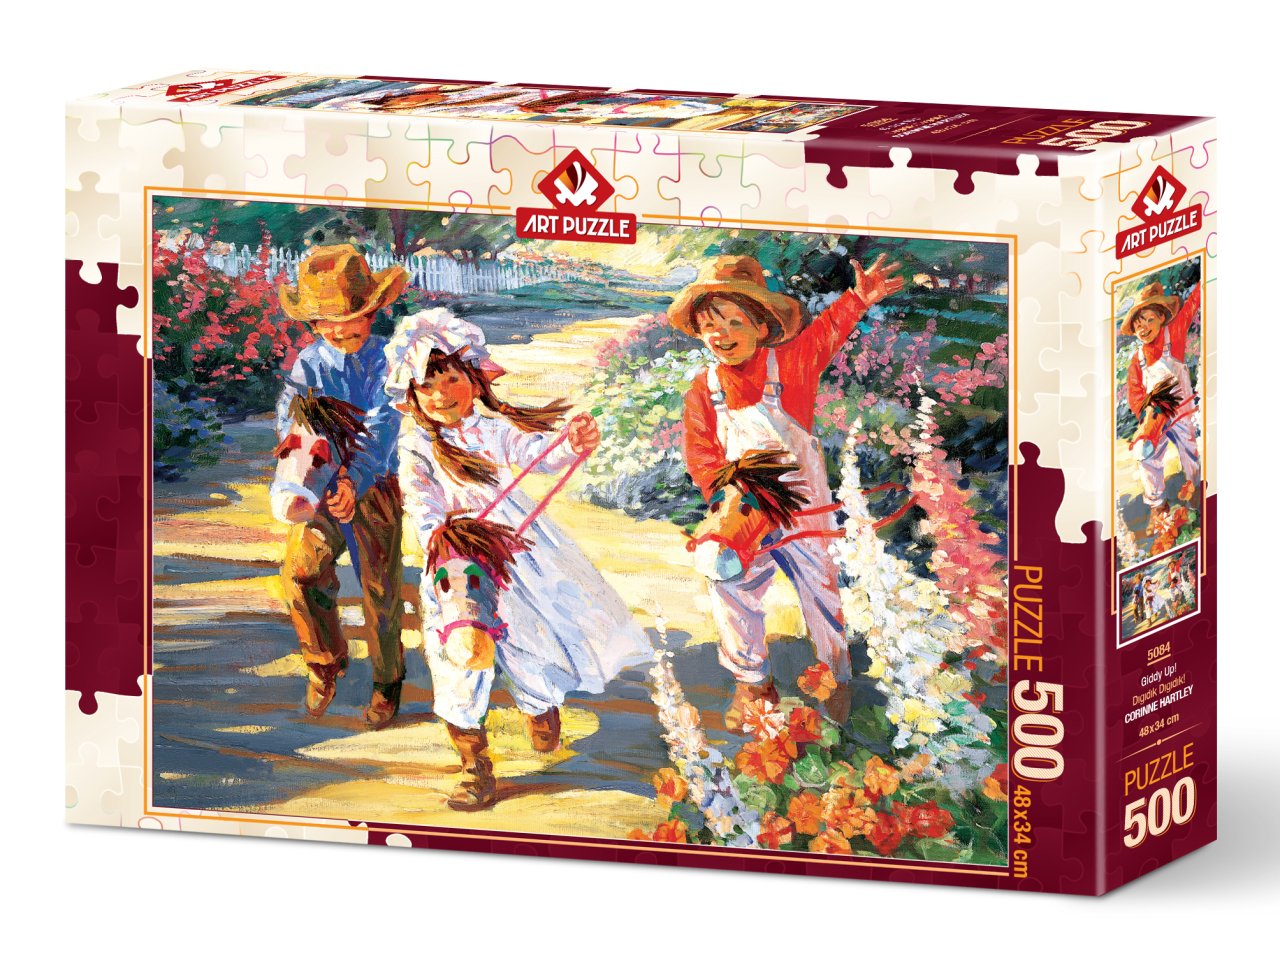 Art Puzzle - Giddy Up!  - 500 Piece Jigsaw Puzzle